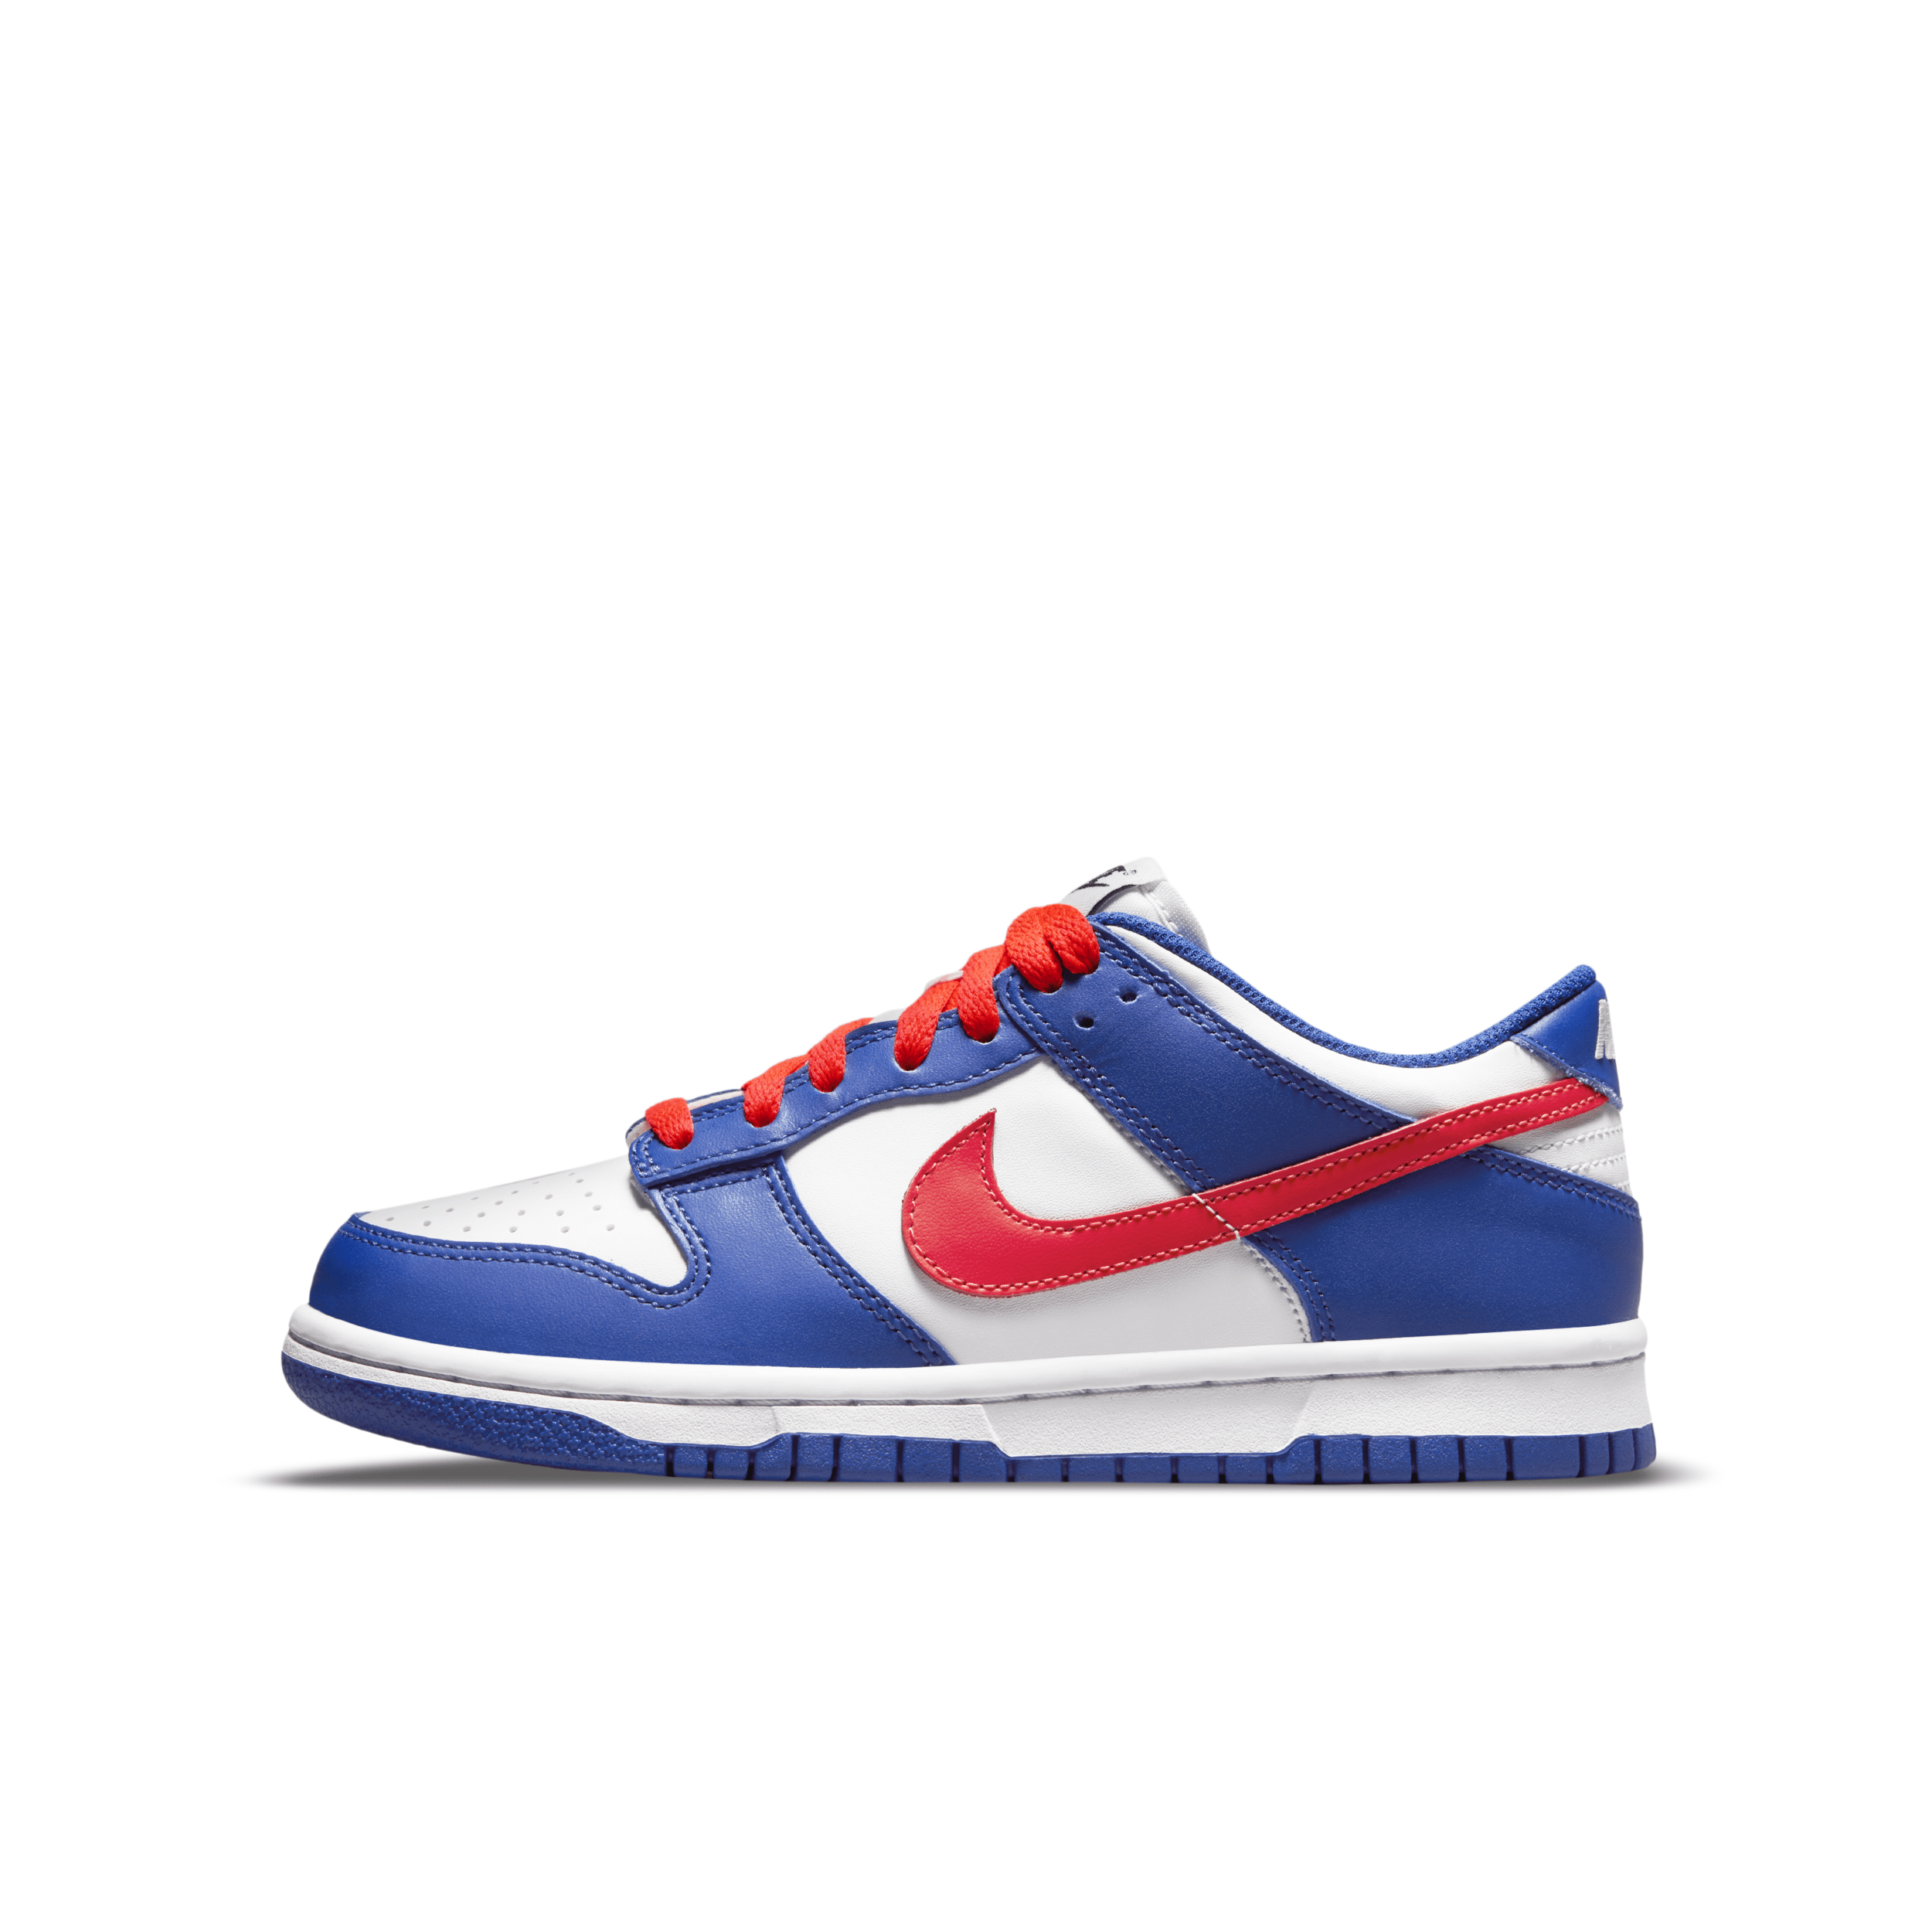 Nike Dunk Low Big Kids' Shoes In White